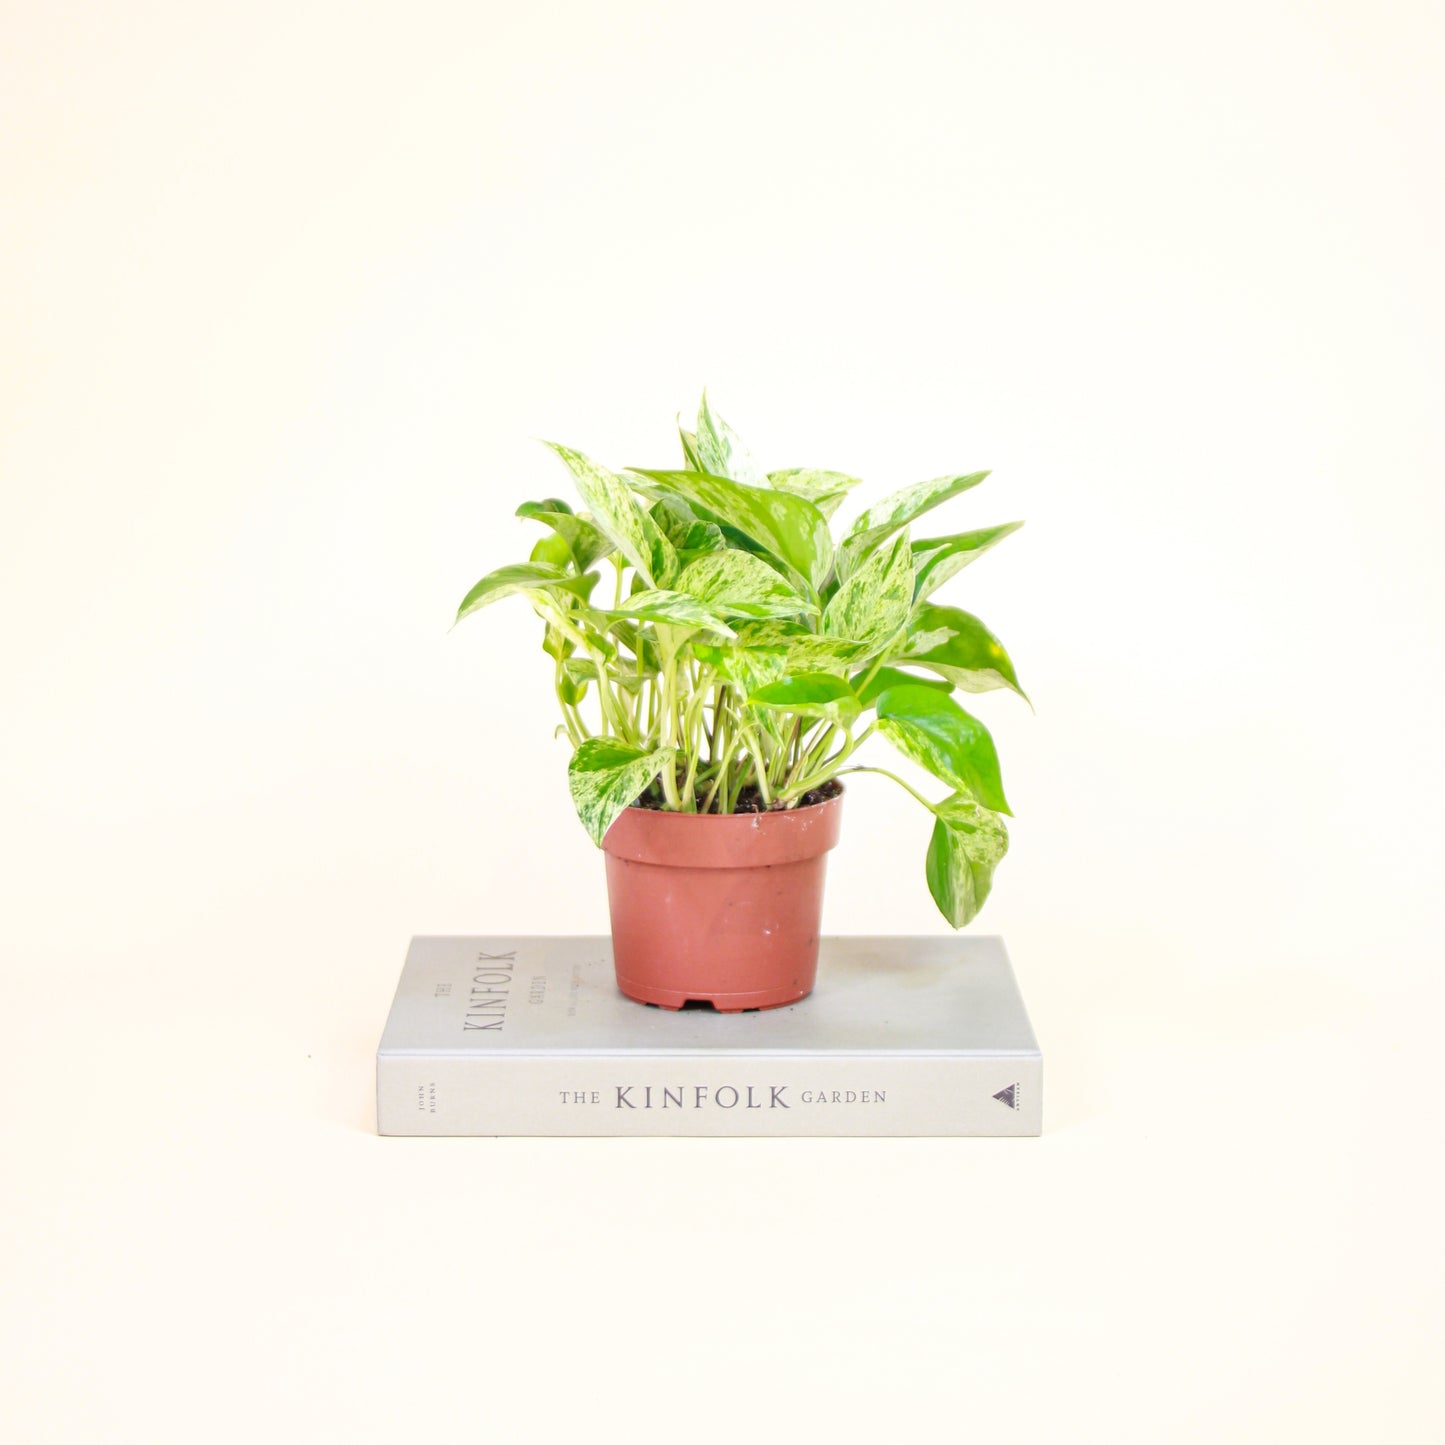 Pothos, Devil's Ivy, Money Plant, Money Vine (Epipremnum aureum) in a 5 inch pot. Indoor plant for sale by Promise Supply for delivery and pickup in Toronto